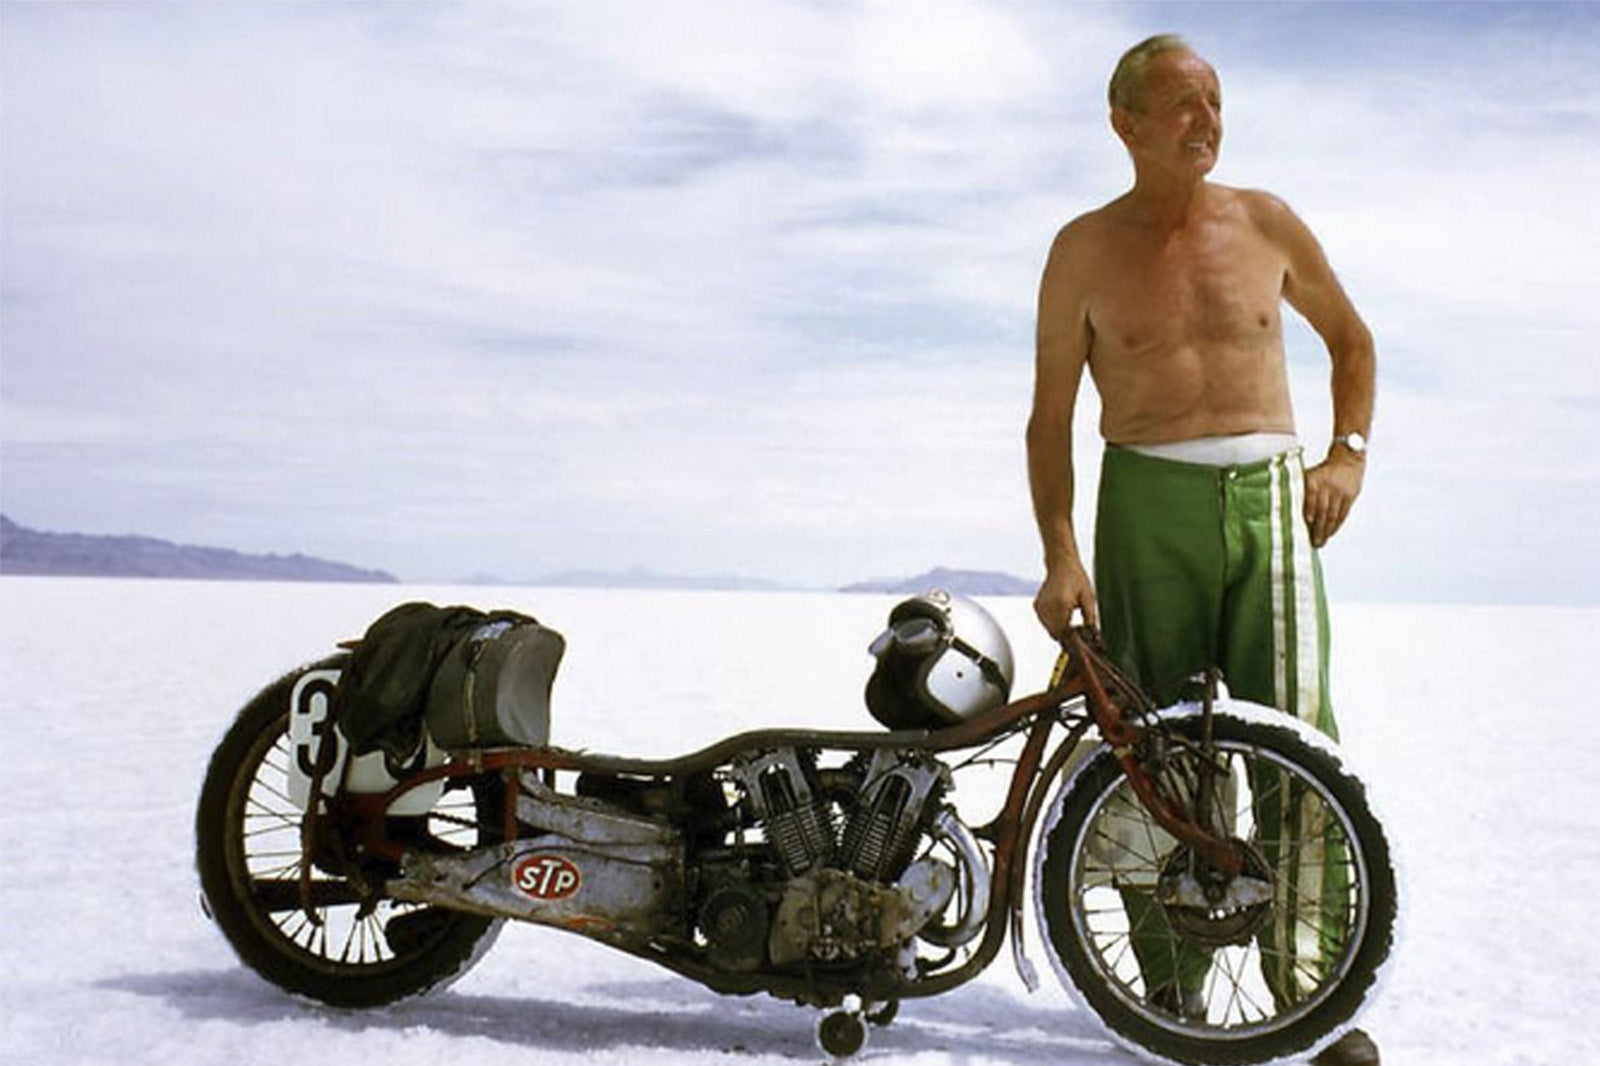 BURT MUNRO CHALLENGE A MECCA FOR MOTORCYCLING